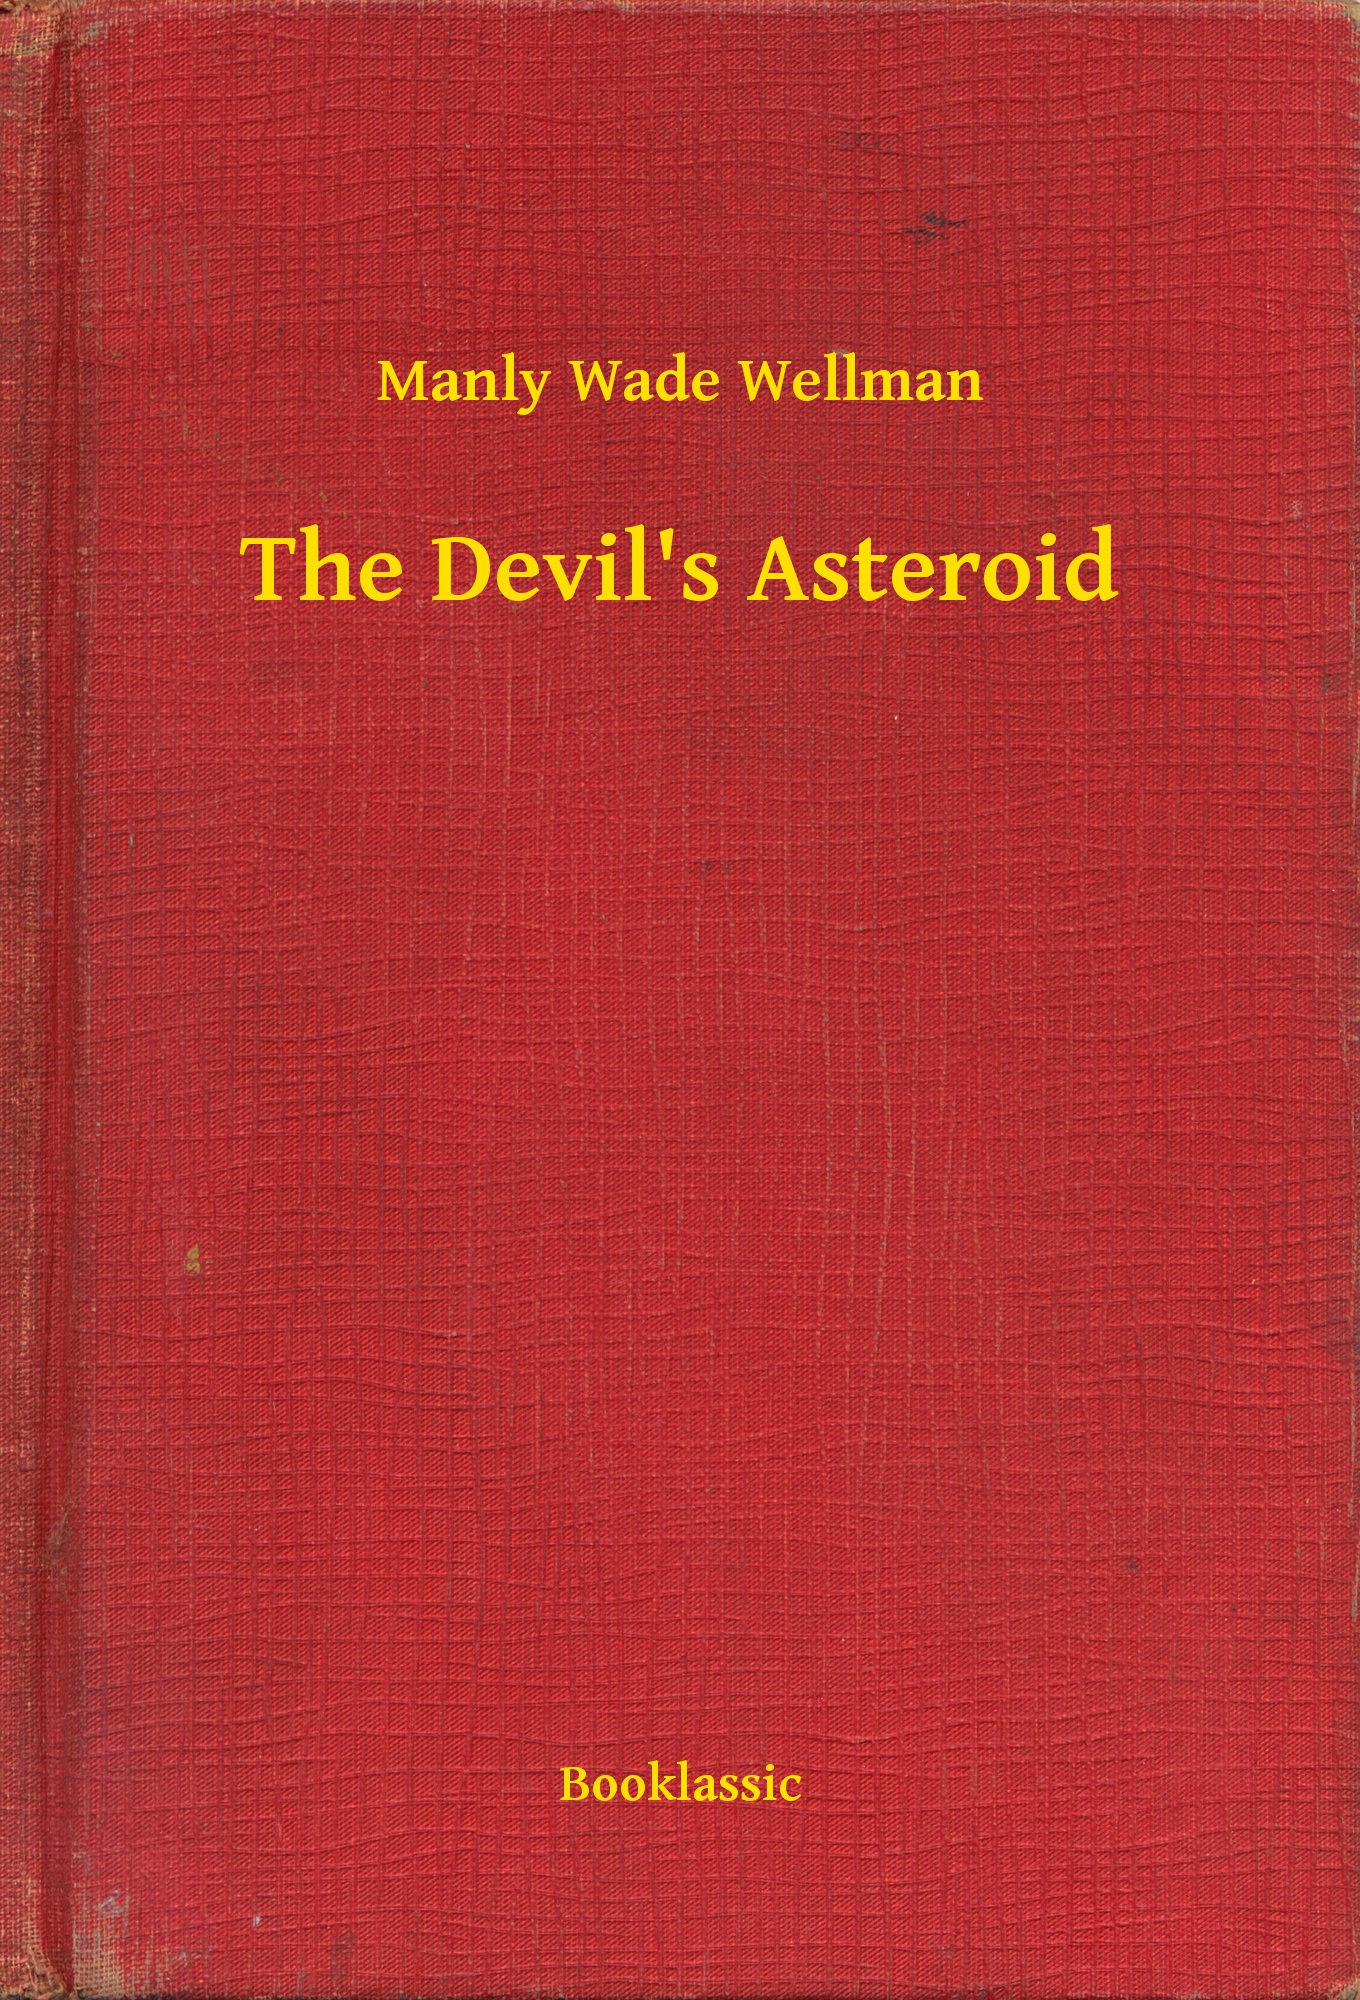 The Devil"s Asteroid